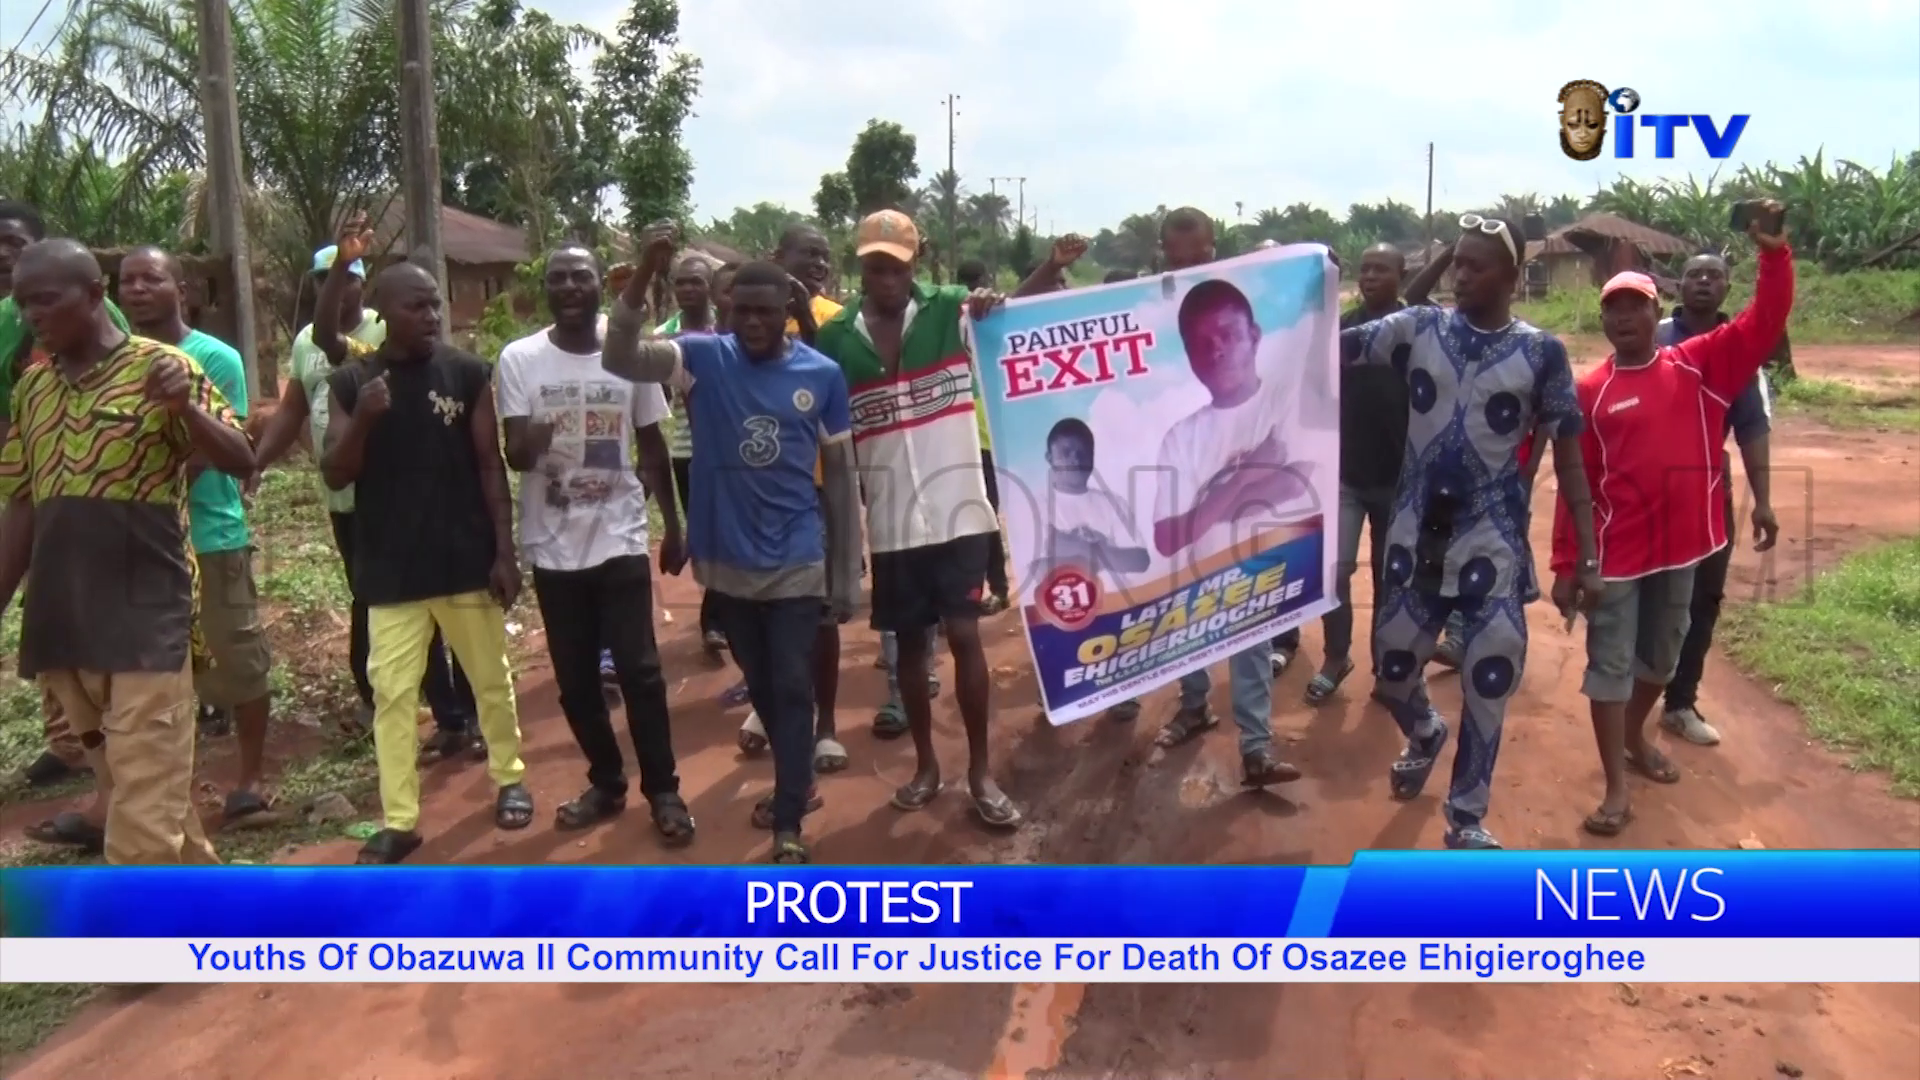 Youths Of Obazuwa II Community Call For Justice For Death Of Osazee Ehigieroghee